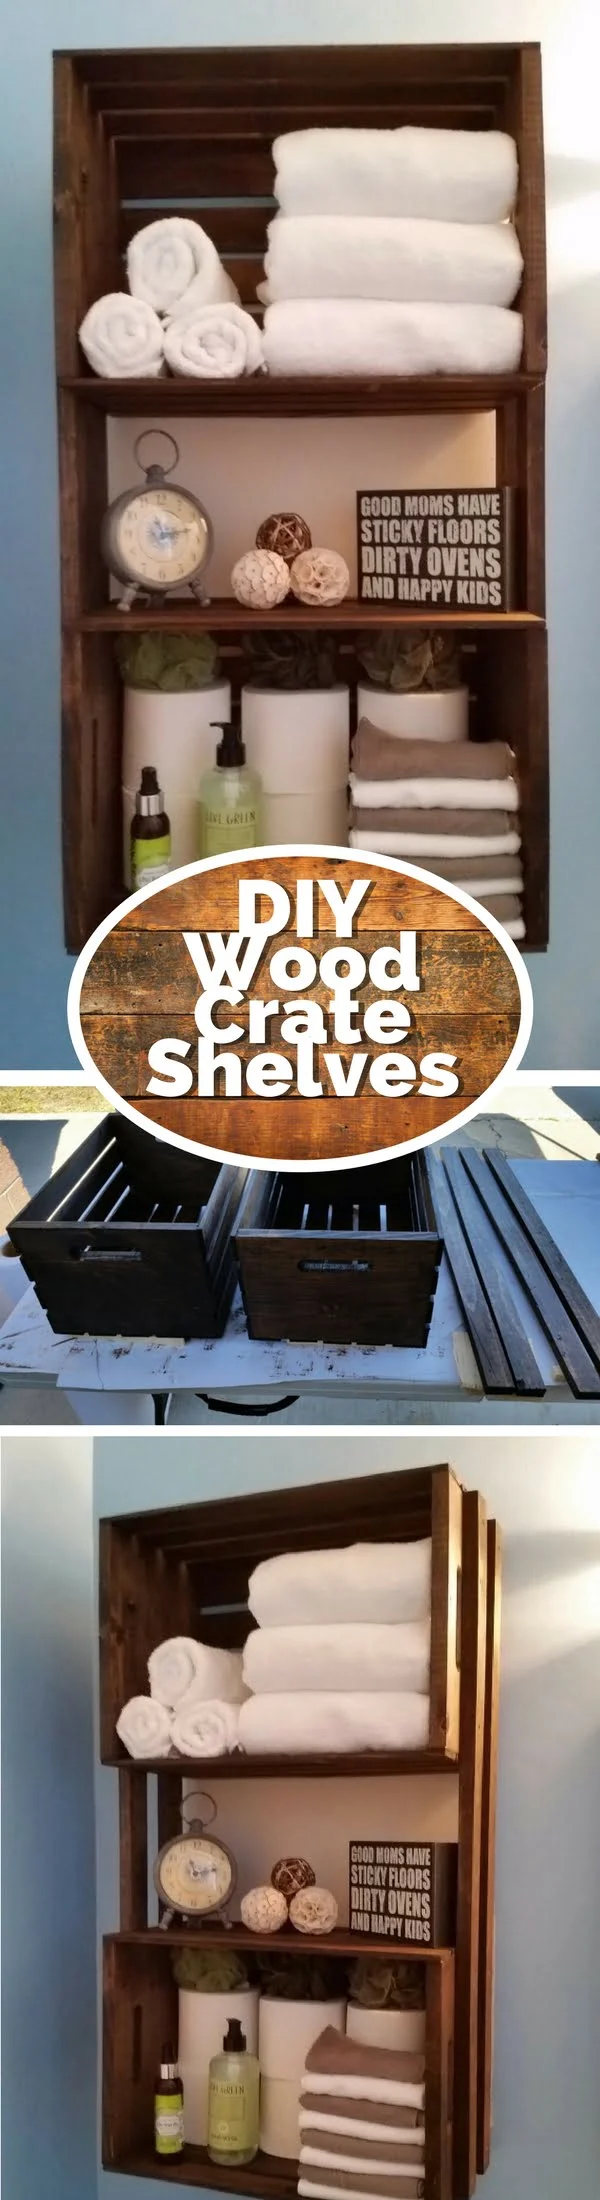 Check out how to build a DIY rustic towel rack from wood crates @istandarddesign